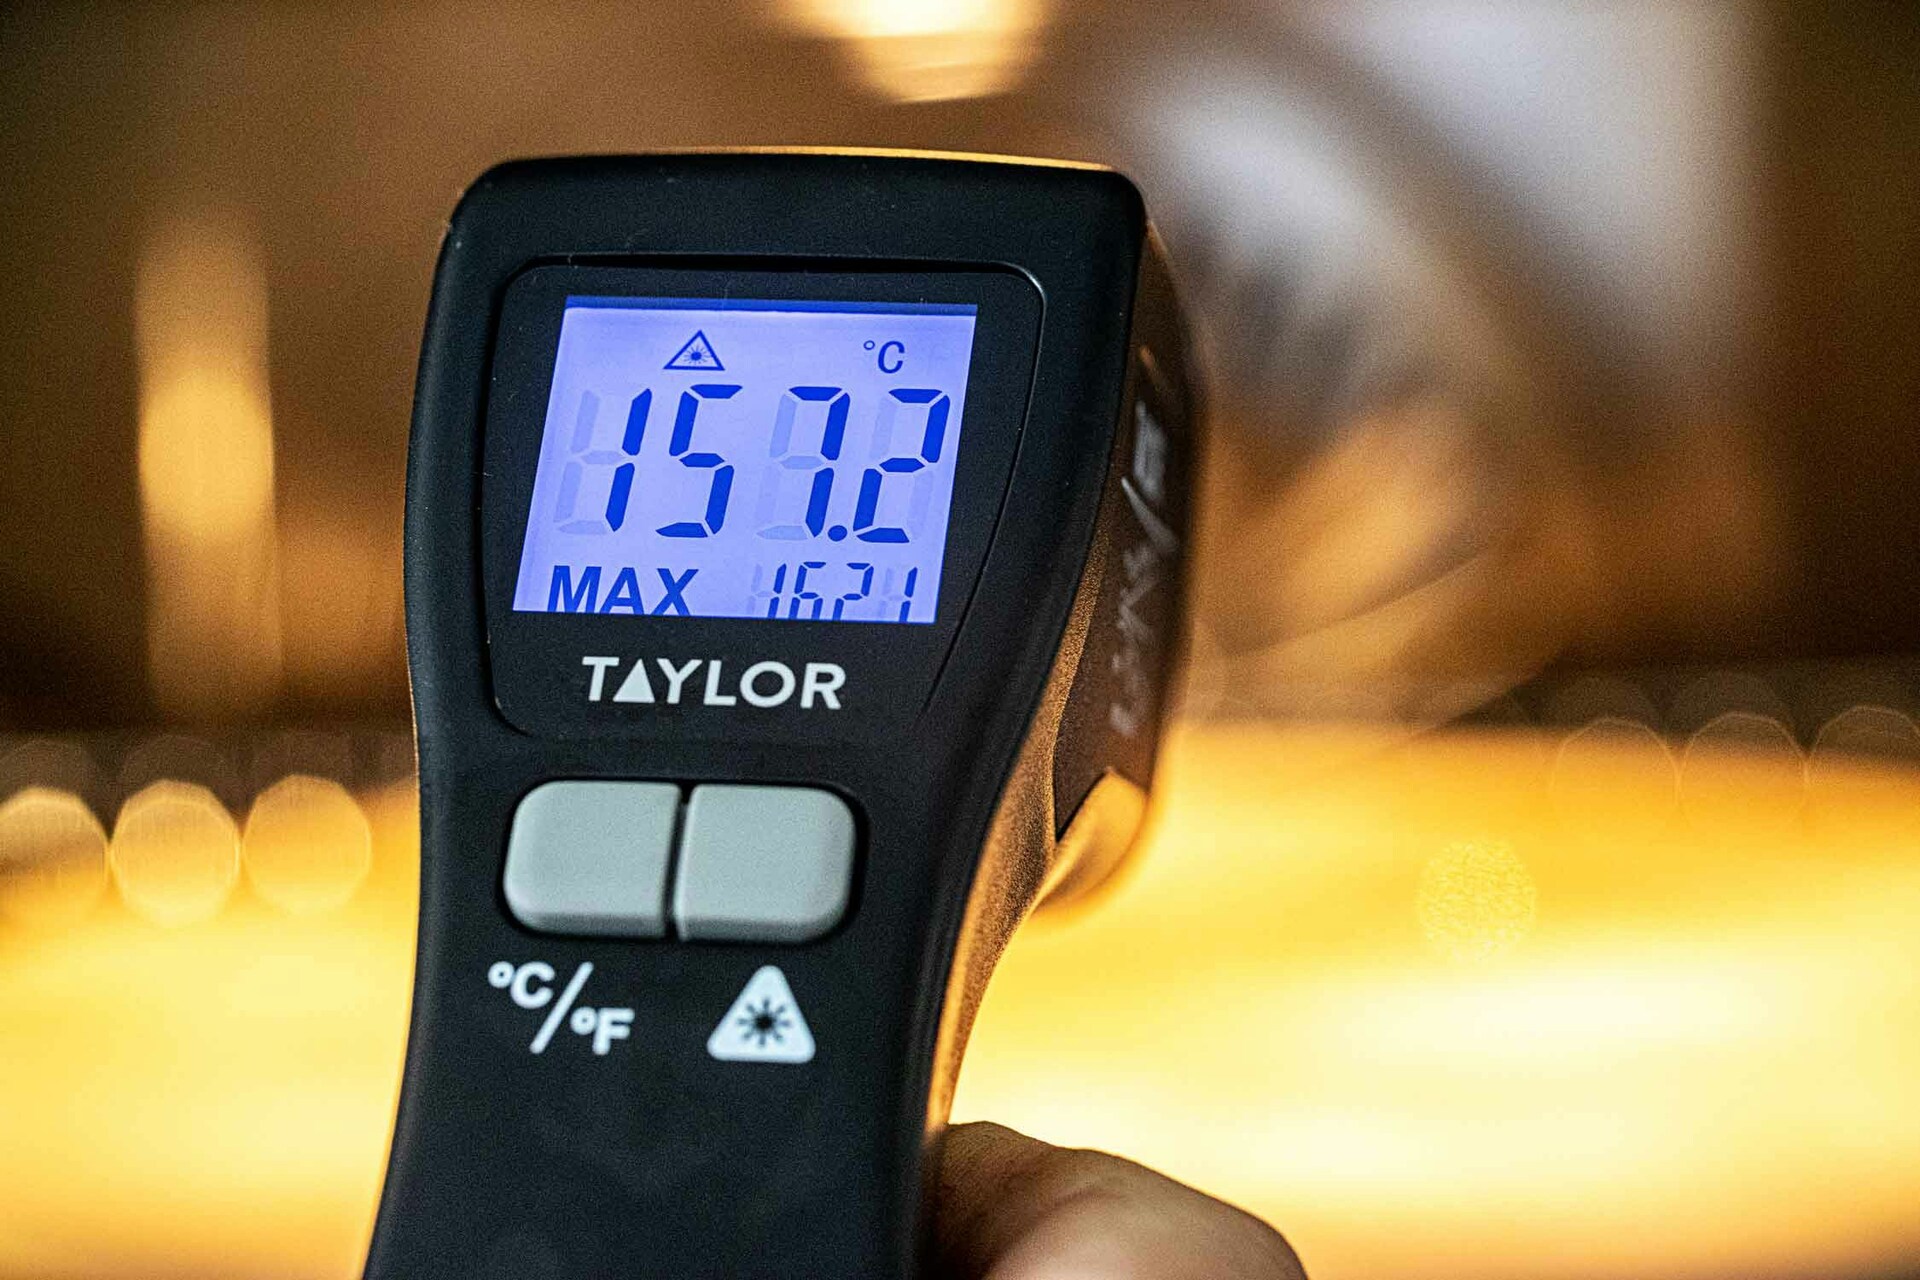 https://royaldesign.com/image/2/kitchen-craft-taylor-pro-infrared-thermometer-blister-packed-3